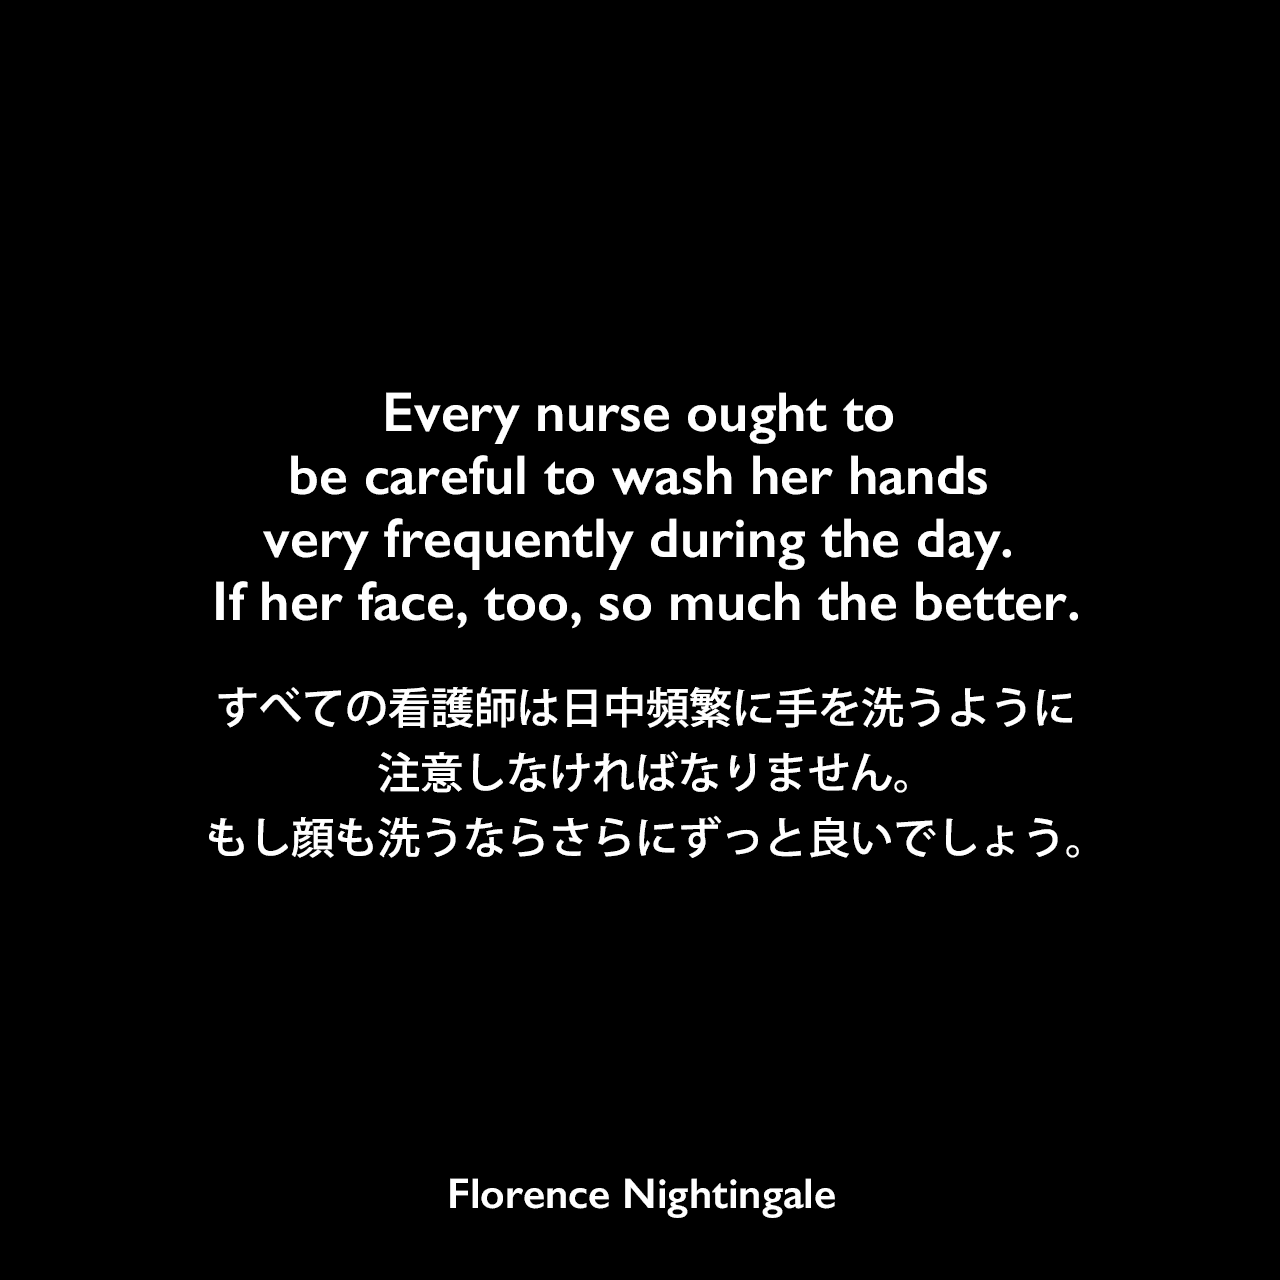 Every nurse ought to be careful to wash her hands very frequently during the day. If her face, too, so much the better.すべての看護師は日中頻繁に手を洗うように注意しなければなりません。もし顔も洗うならさらにずっと良いでしょう。Florence Nightingale